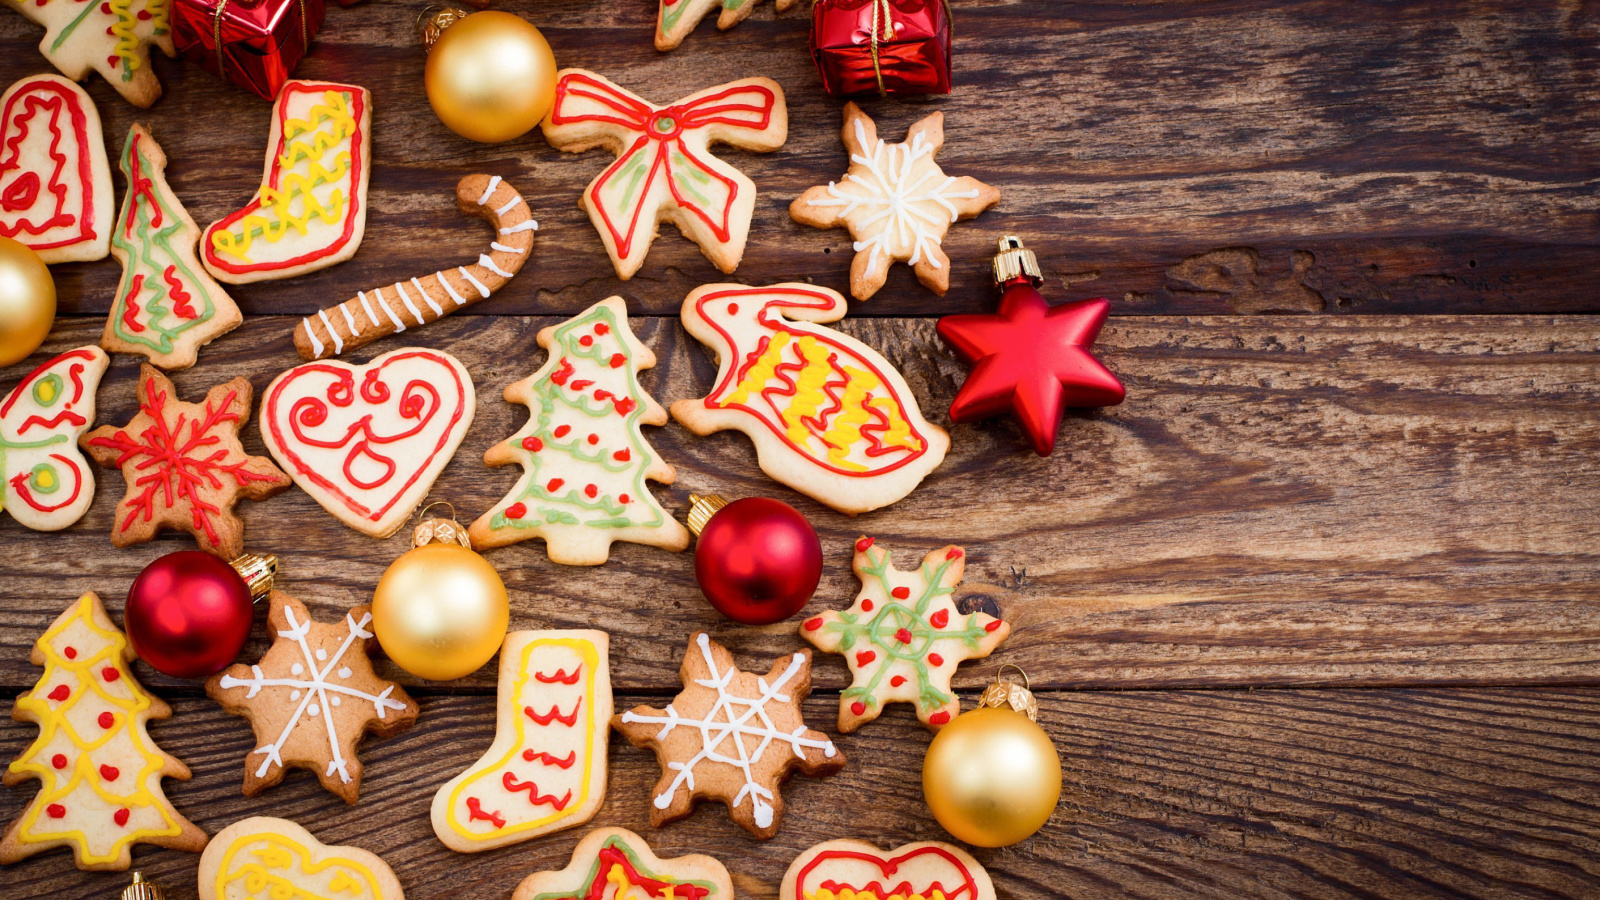 Das Christmas Decorations Cookies and Balls Wallpaper 1600x900